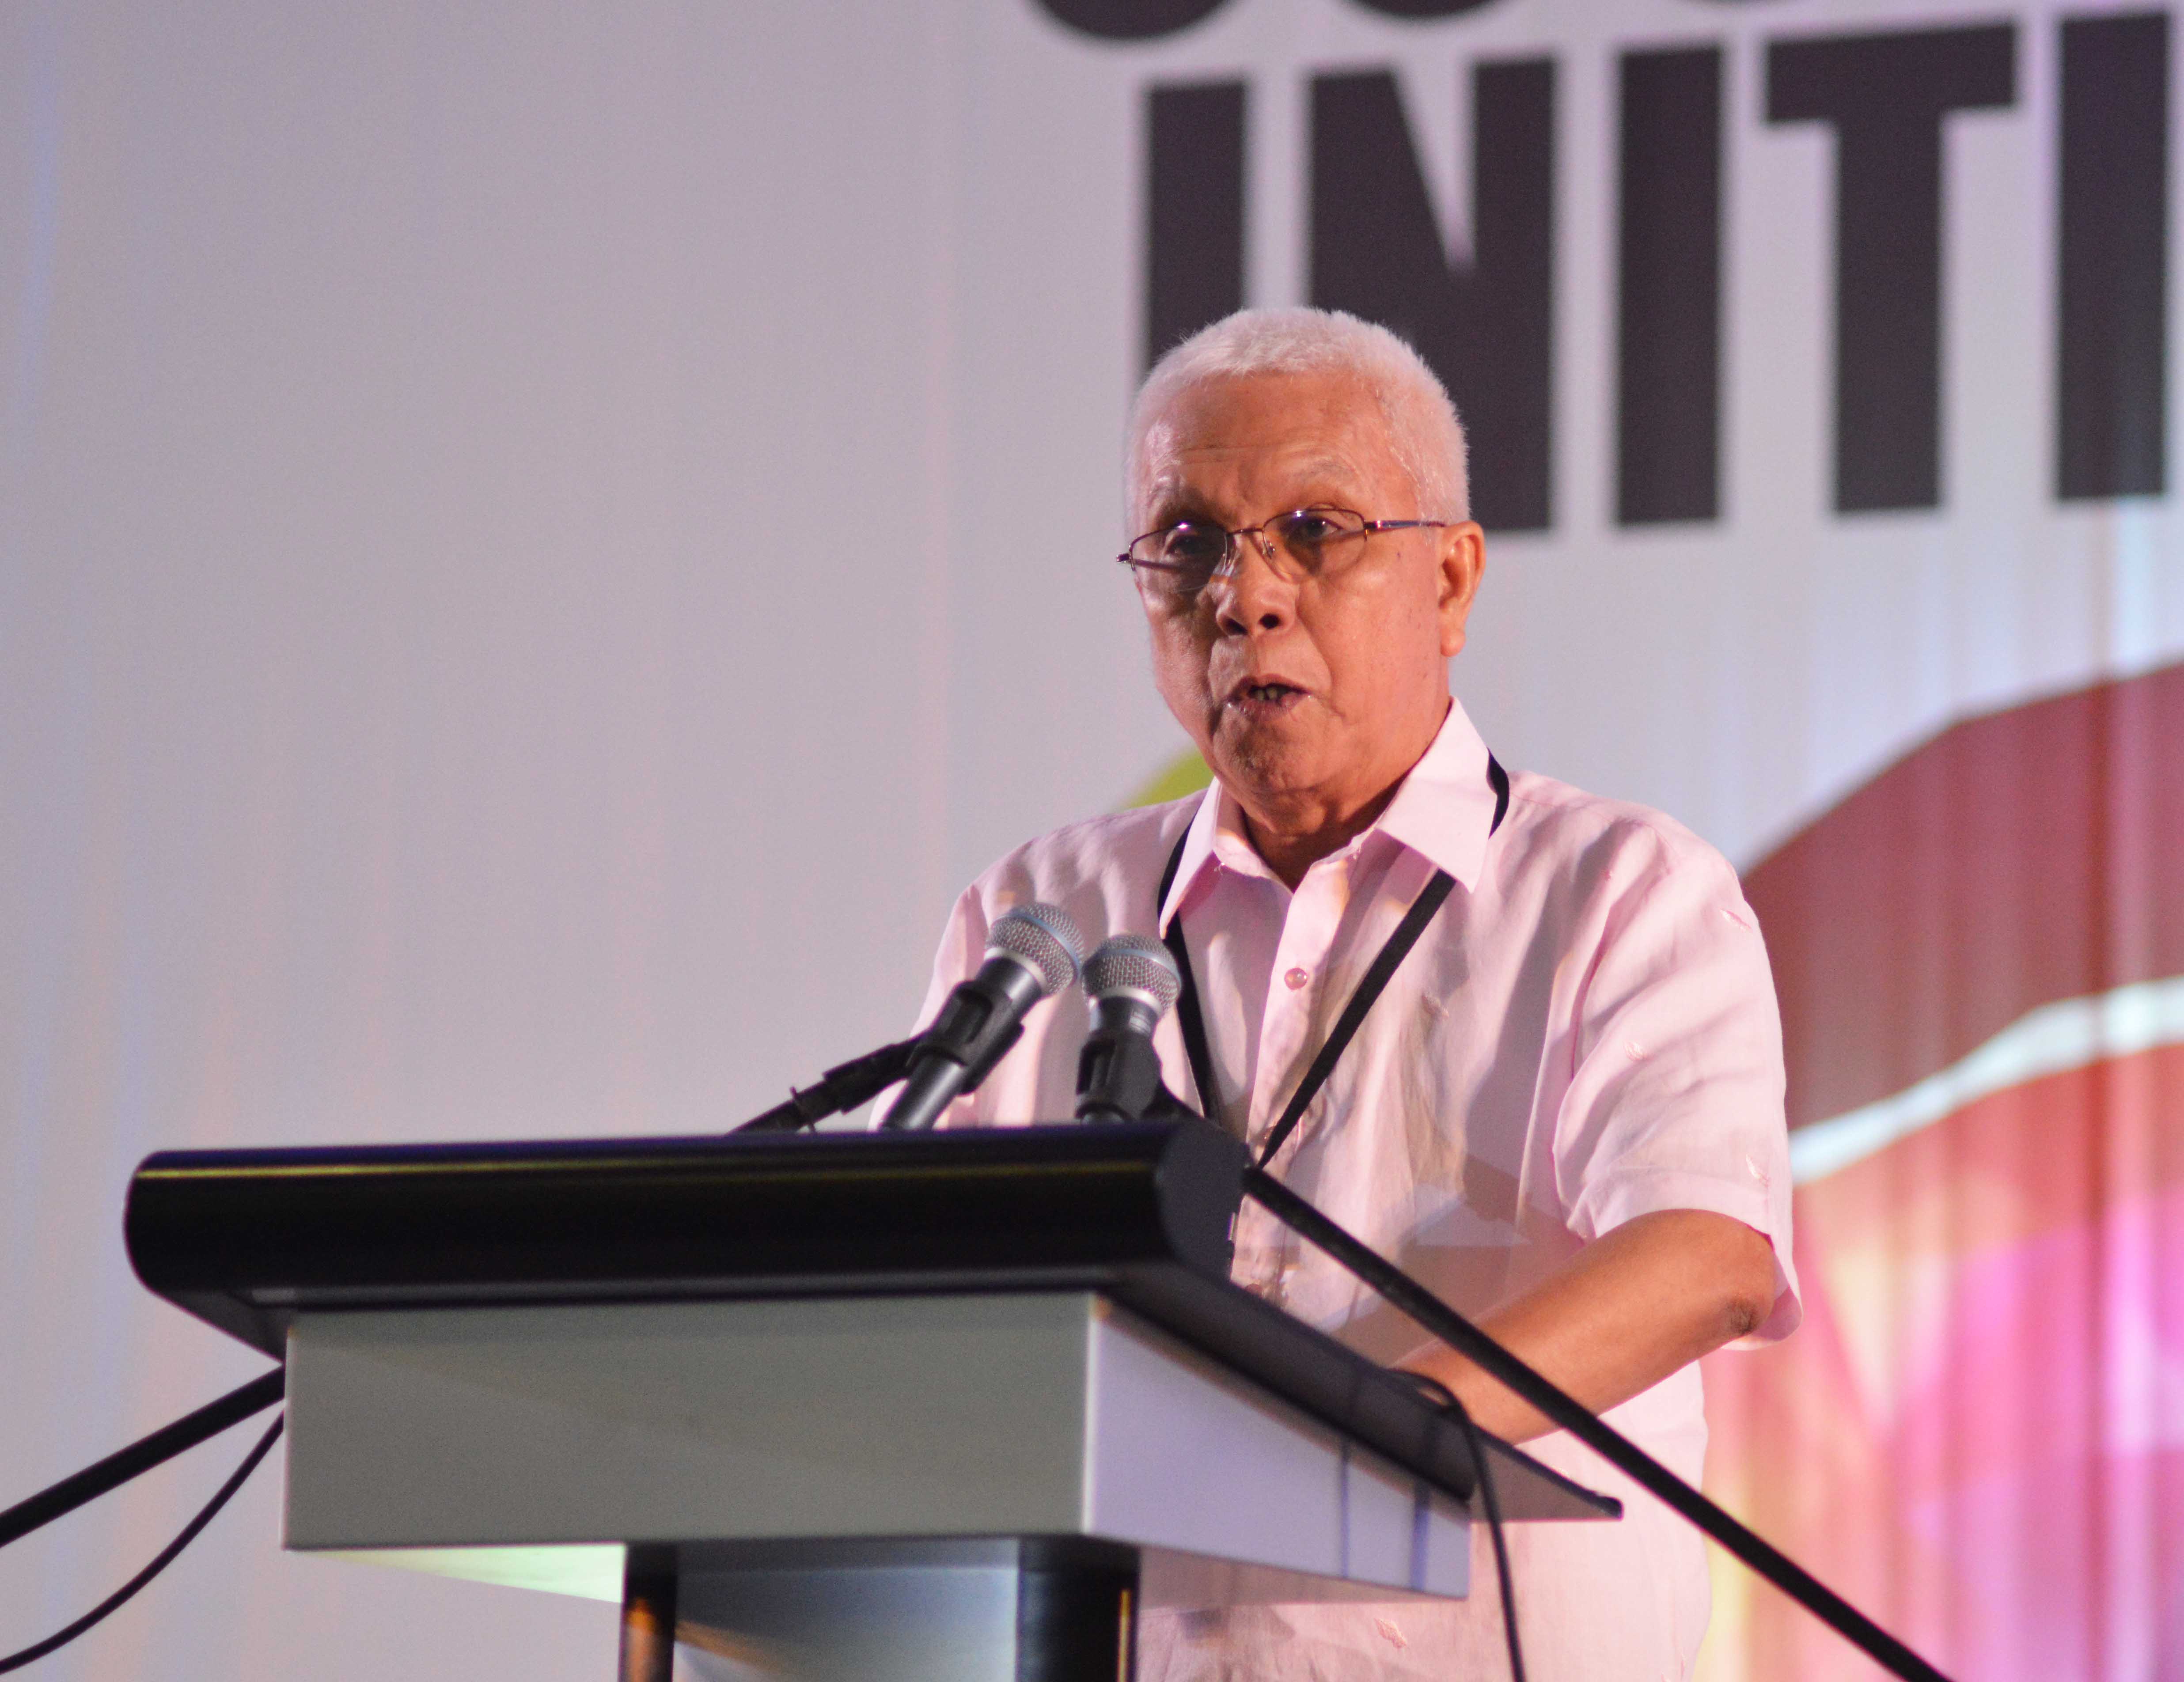 Cabinet Secretary Leoncio Evasco says the objective of the Social Development Initiatives Summit is to address the concerns of the different sectors in the society. The two-day Summit opened its first day on Wednesday, August 17, 2016 at the SMX Convention Center in Lanang, Davao City. (Medel V. Hernani/davaotoday.com)